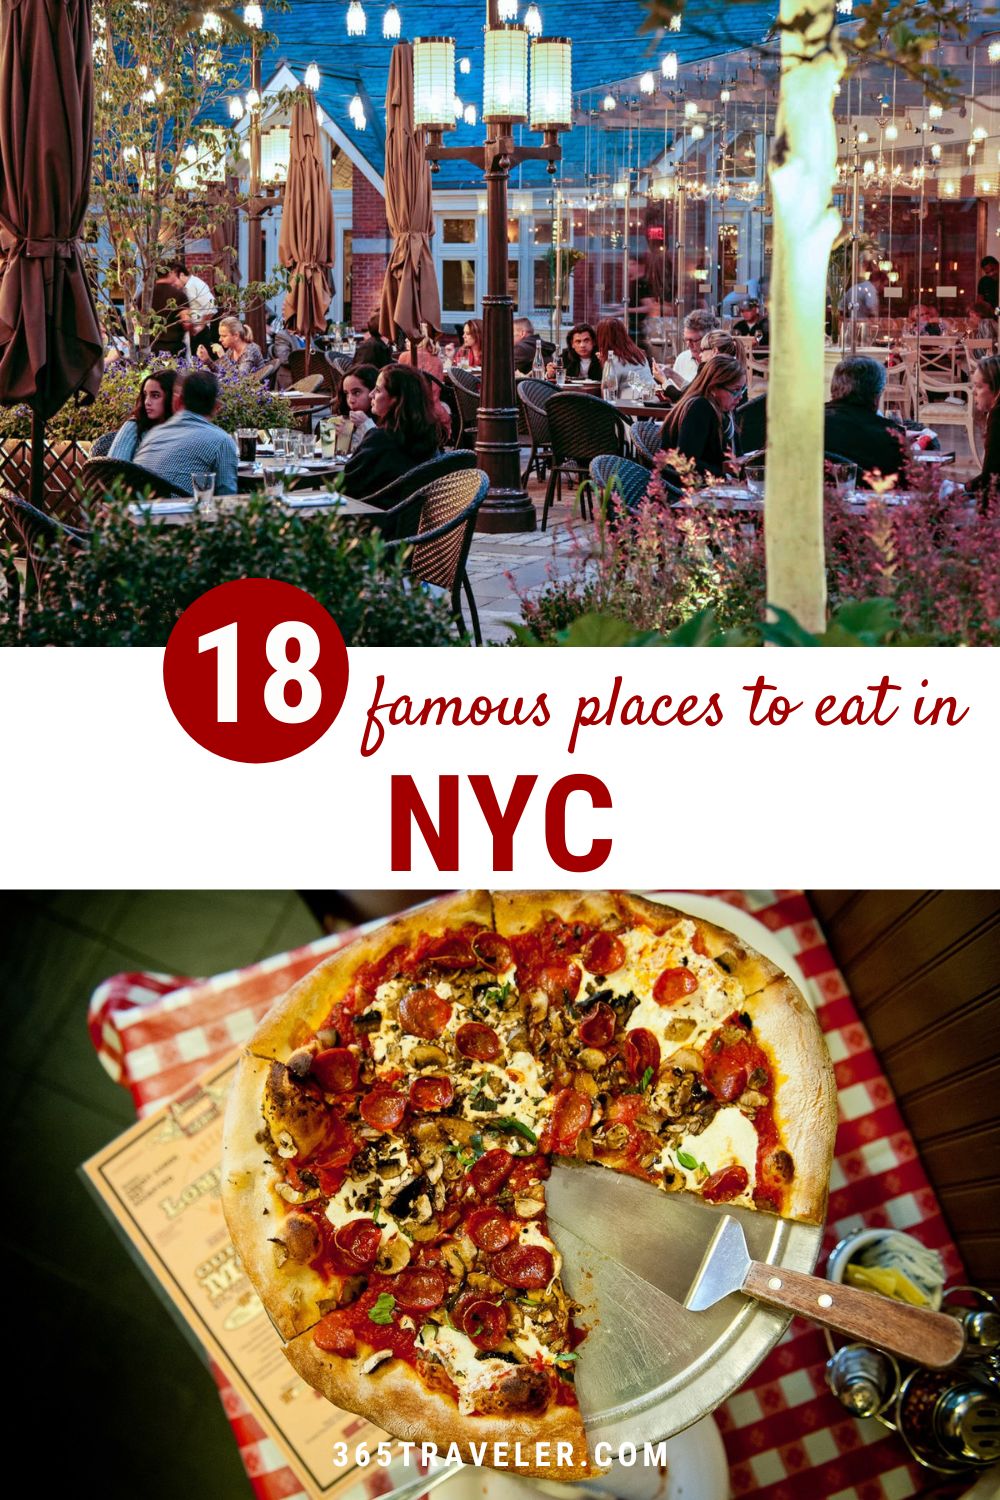 18 FAMOUS PLACES TO EAT IN NYC YOU CAN'T MISS